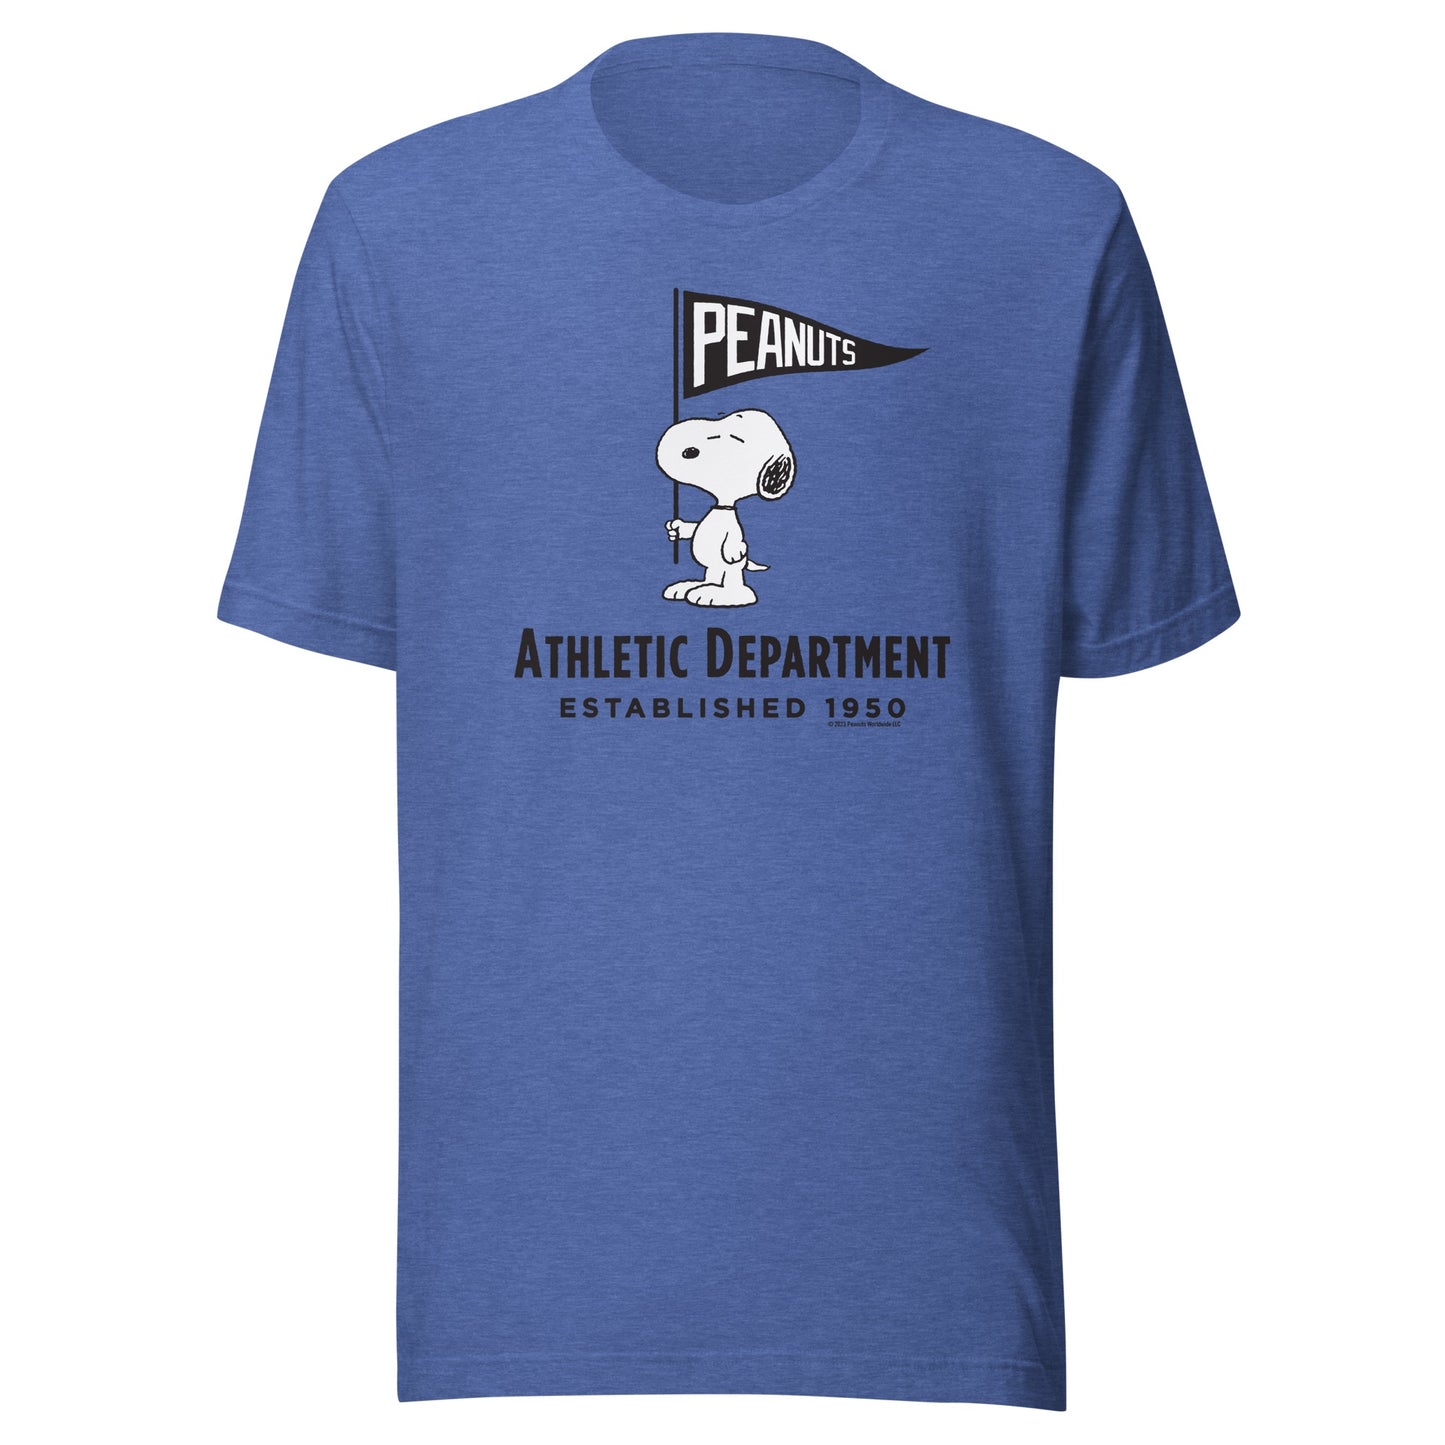 Peanuts Athletic Department Snoopy Adult T-Shirt